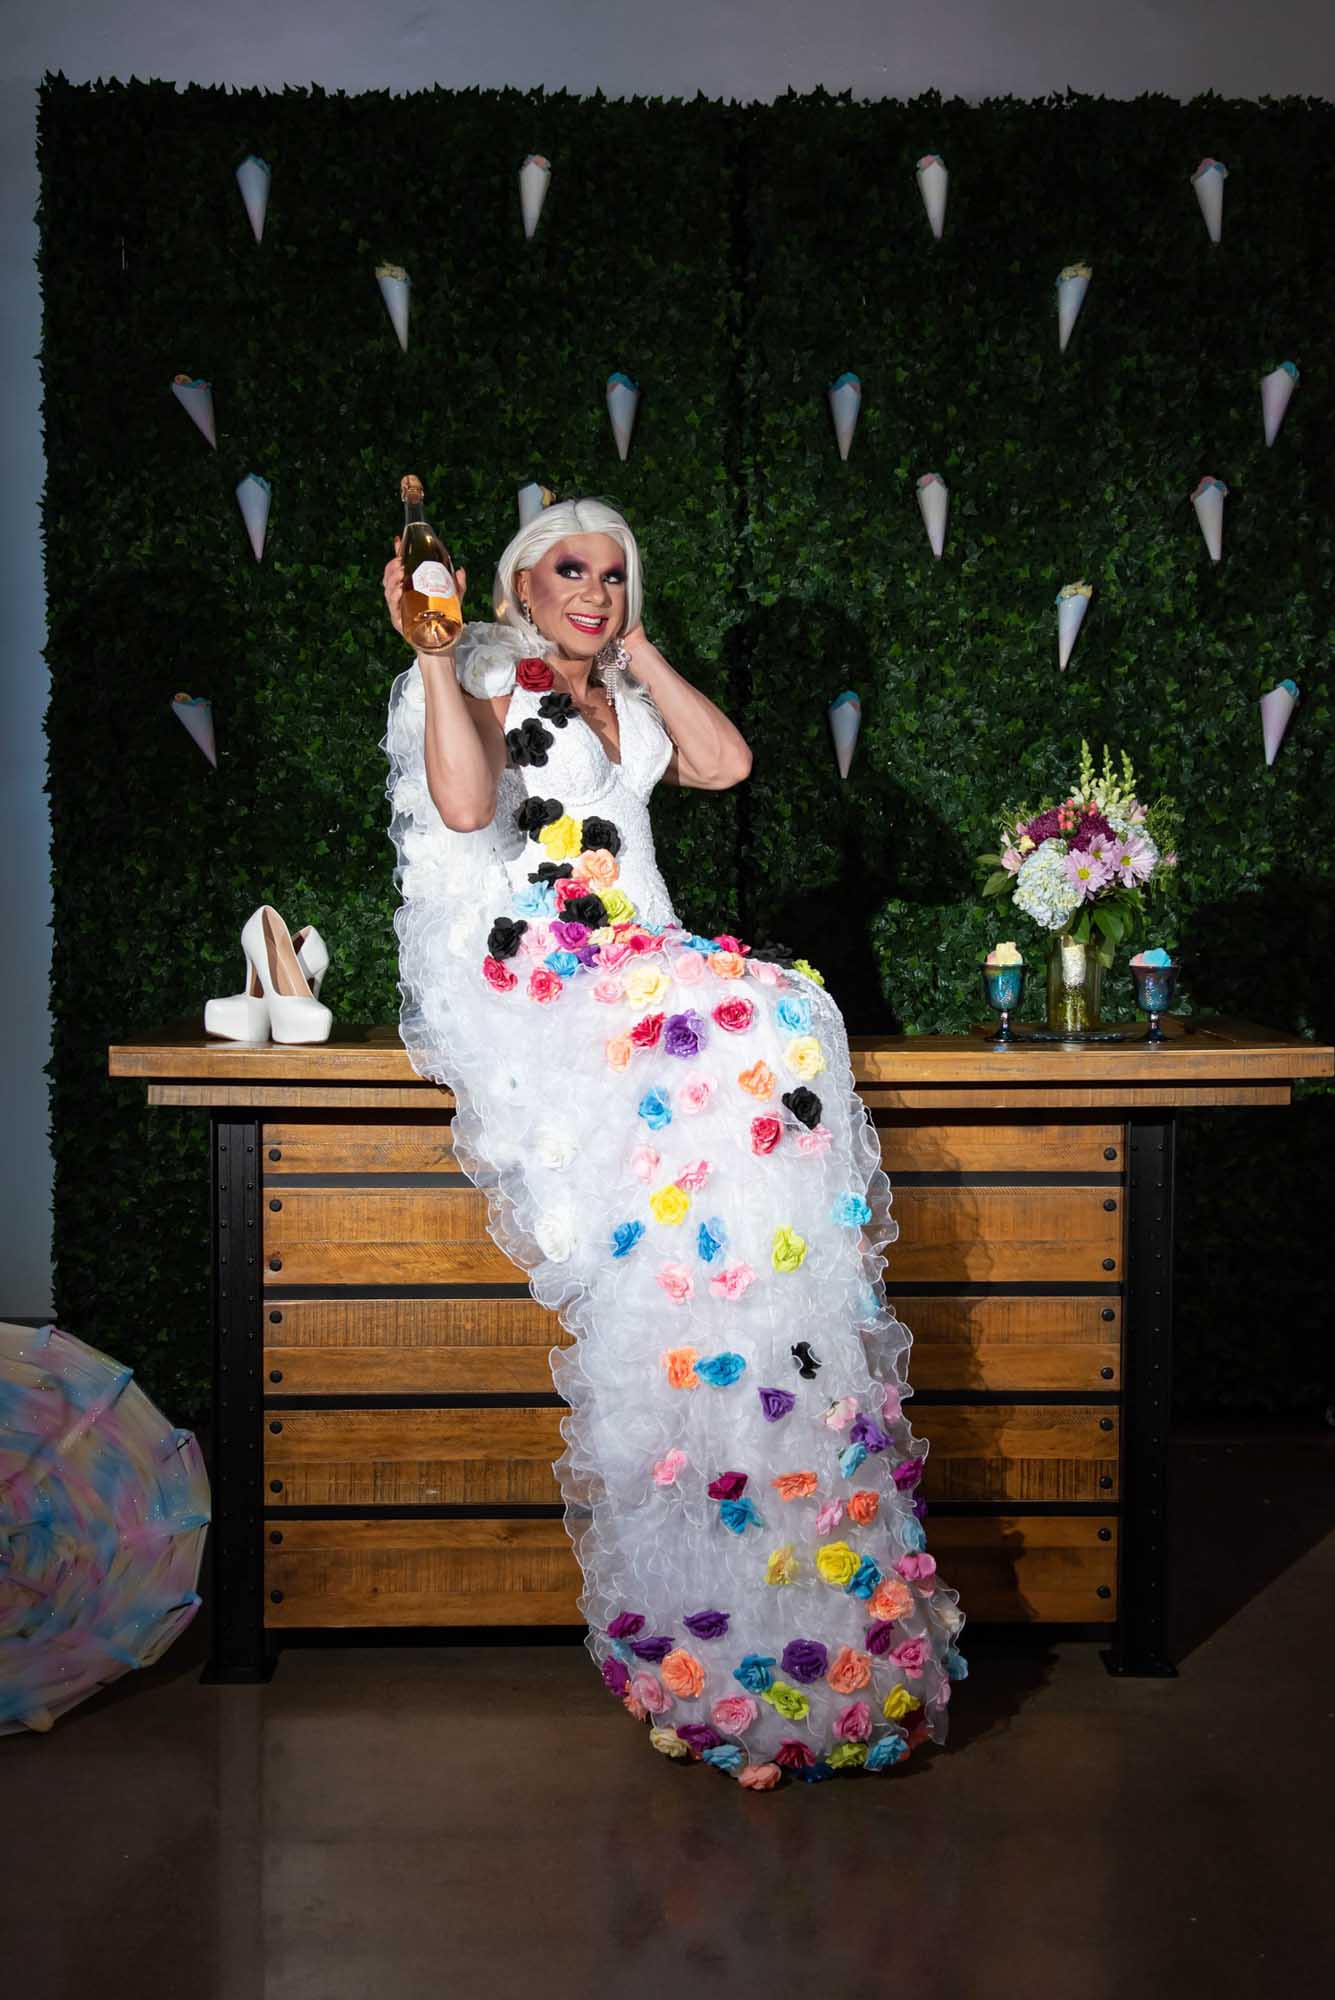 Floral gown, drag queen wedding, cotton candy wall, green wall, train in front